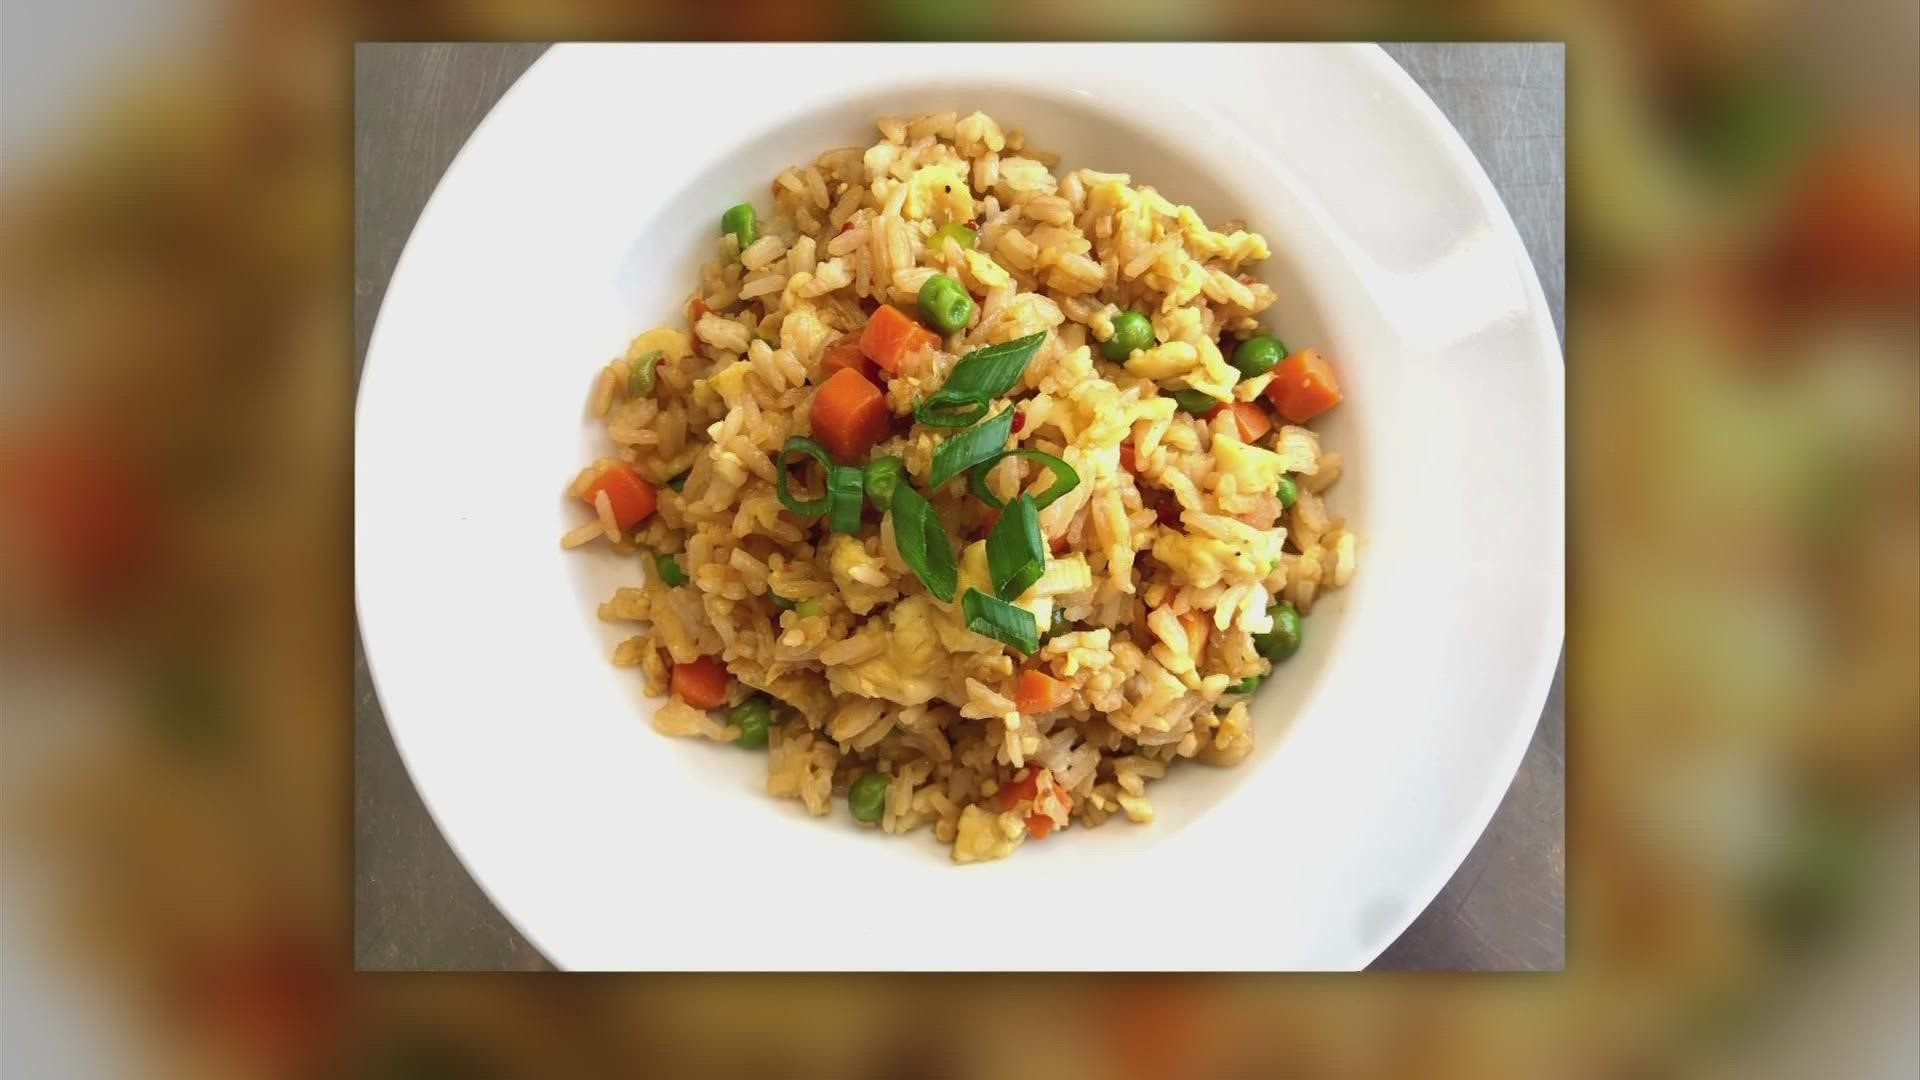 10TV's Brittany Bailey explains how to create this classic Chinese dish from the comfort of your home.